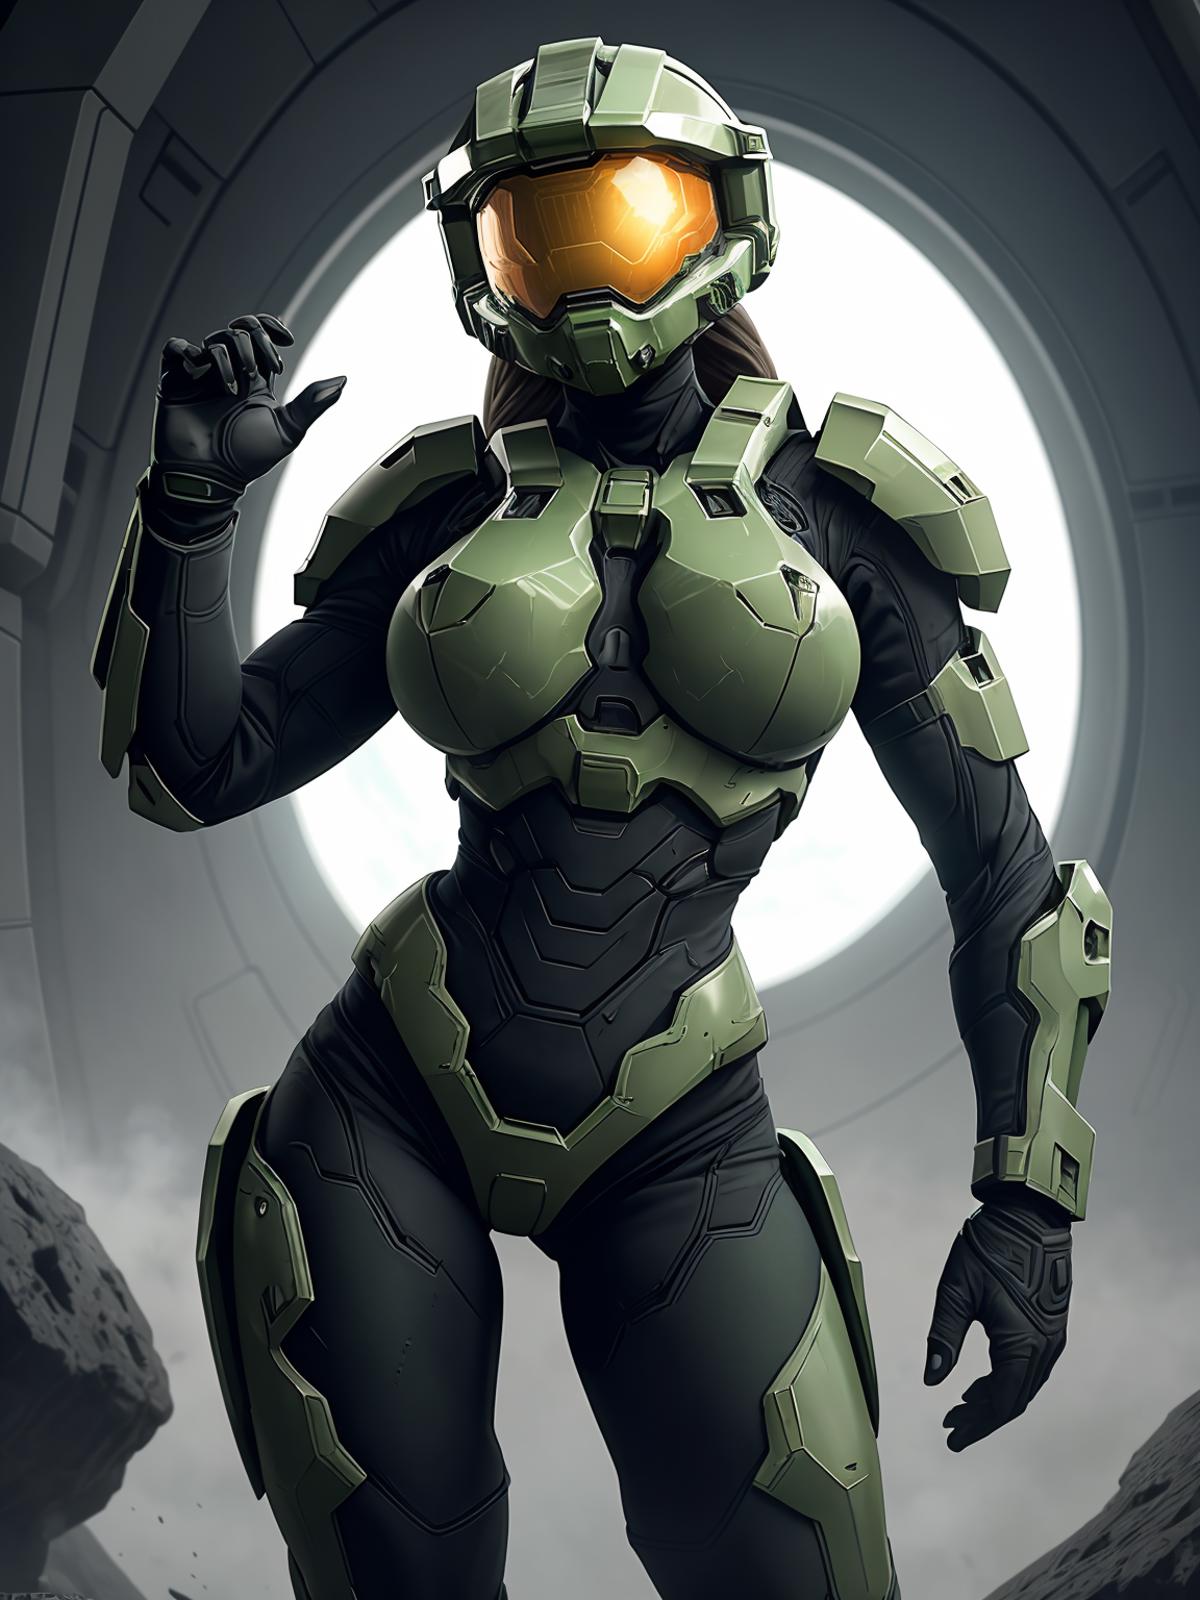 A woman wearing a green power suit standing in front of a window.